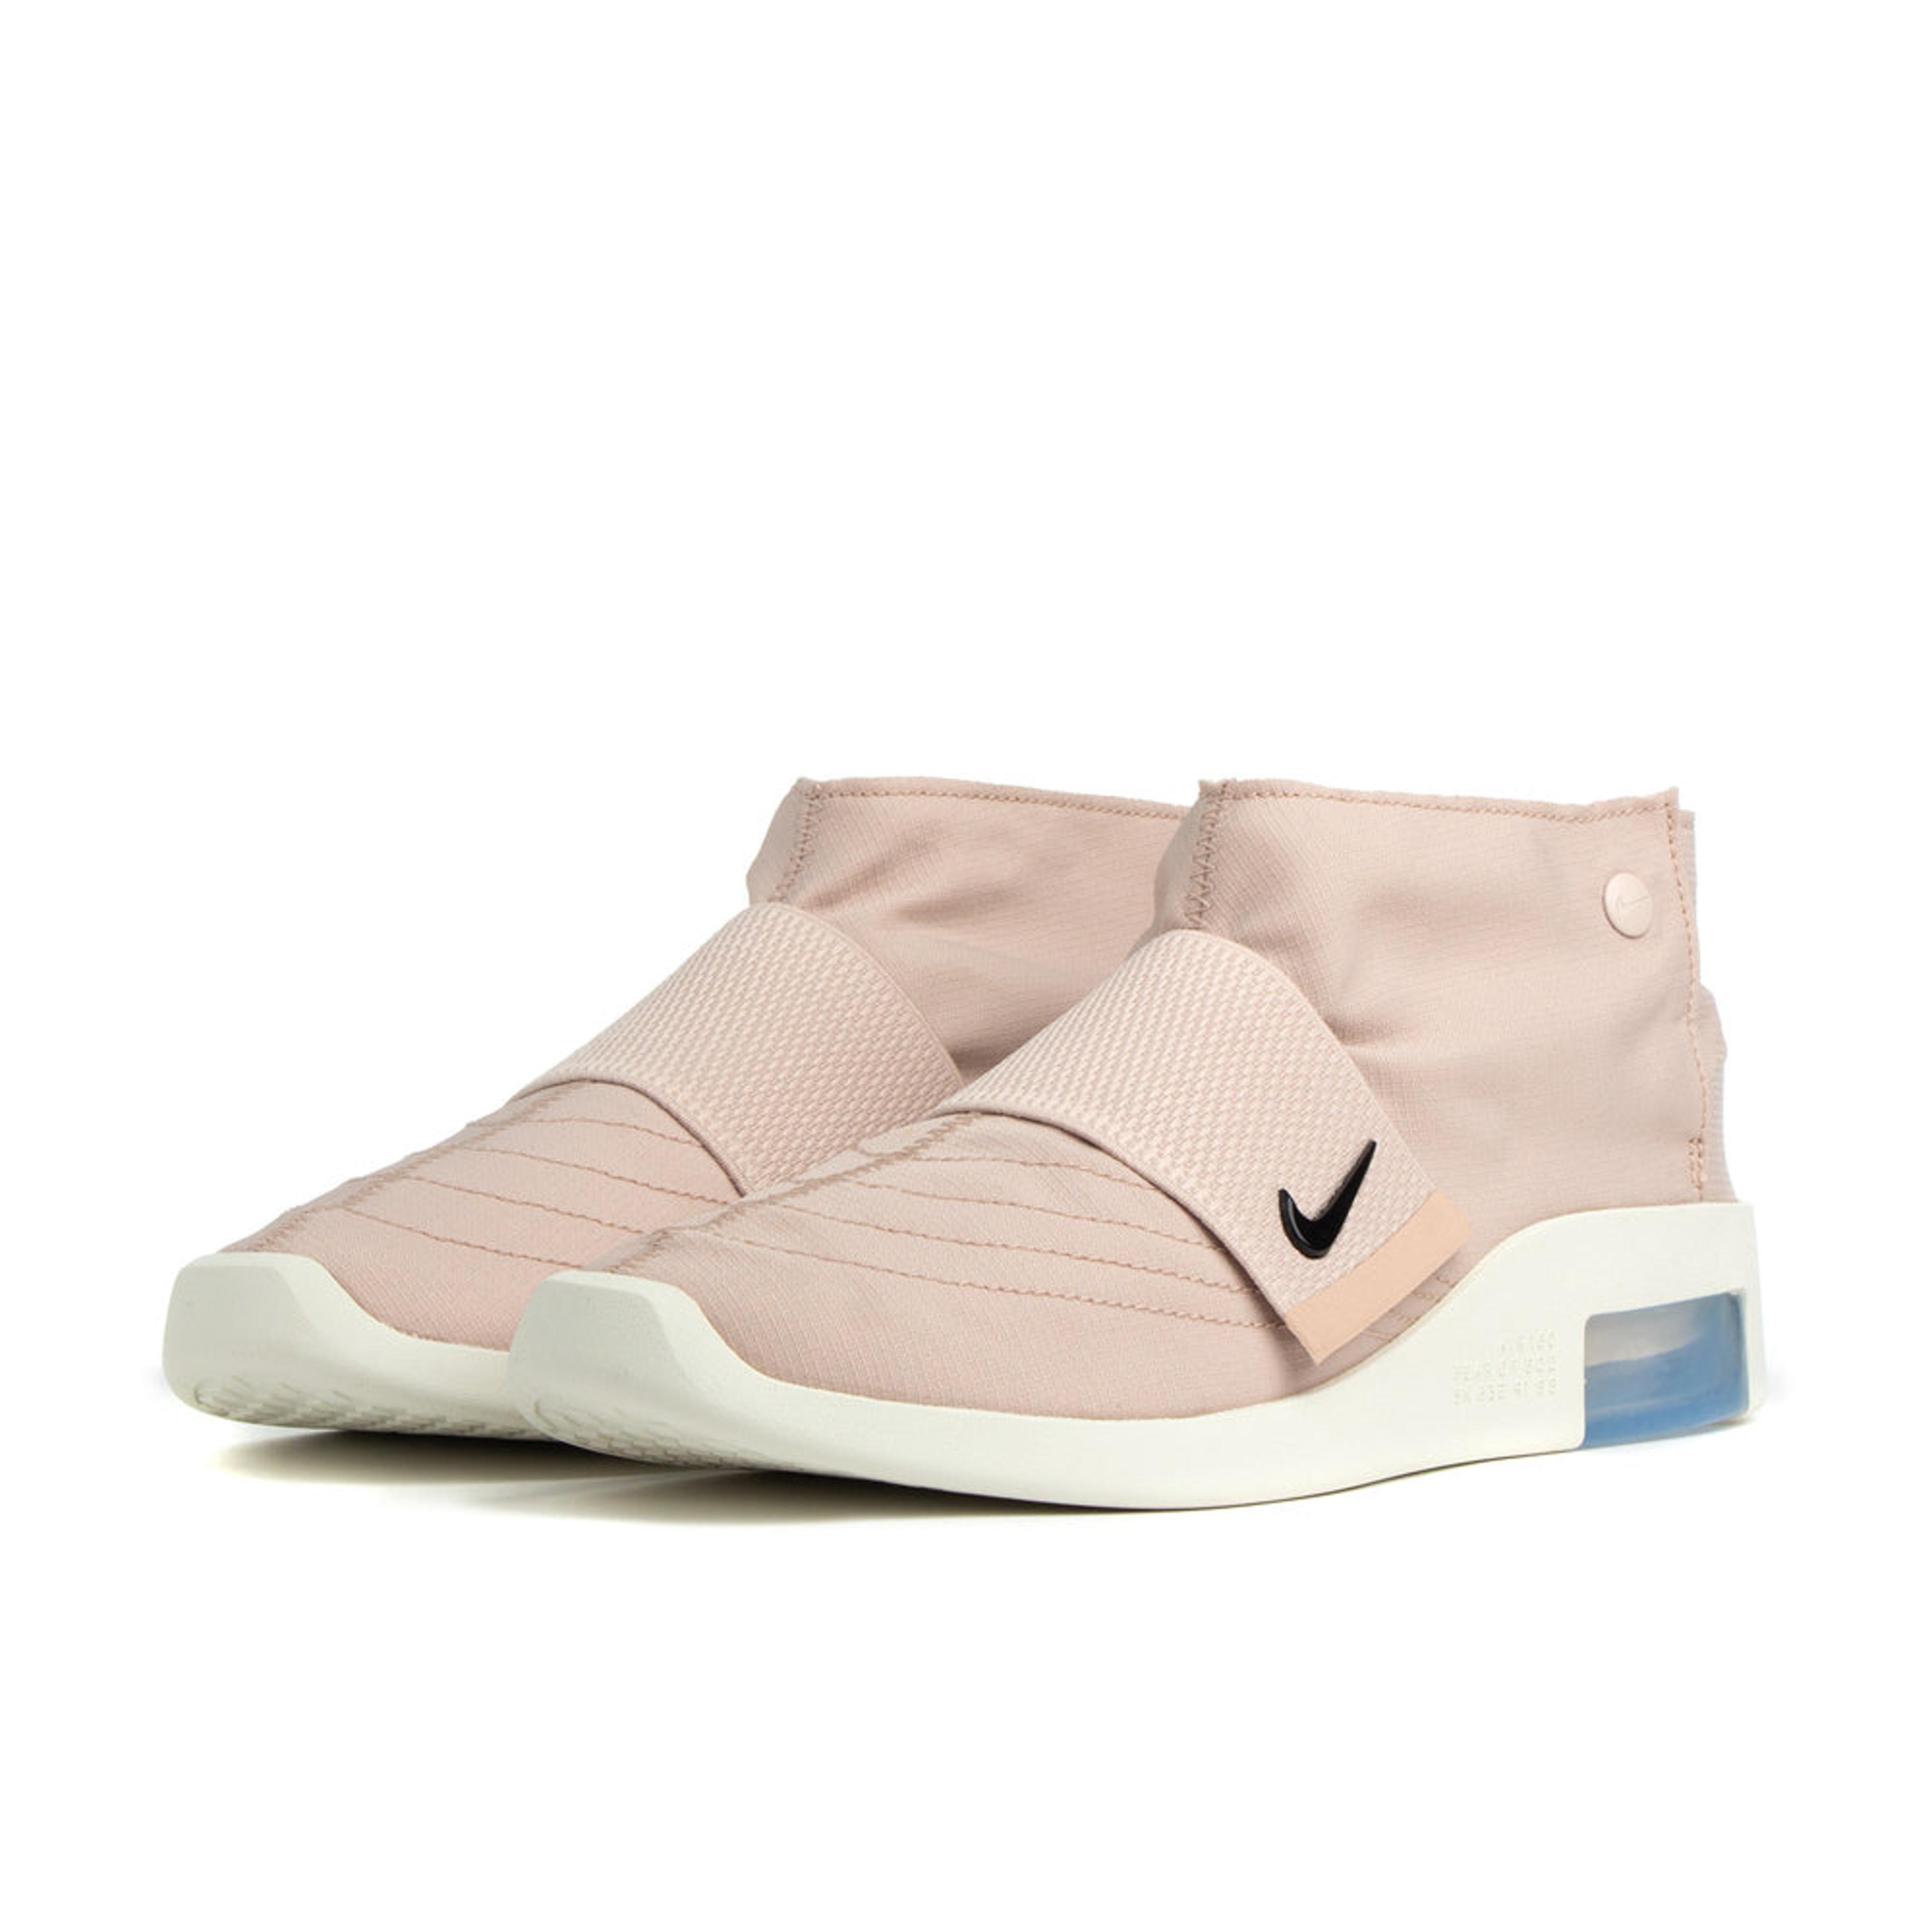 Alternate View 2 of Men's Nike Air X Fear Of God MOC "Particle Beige" AT8086 200